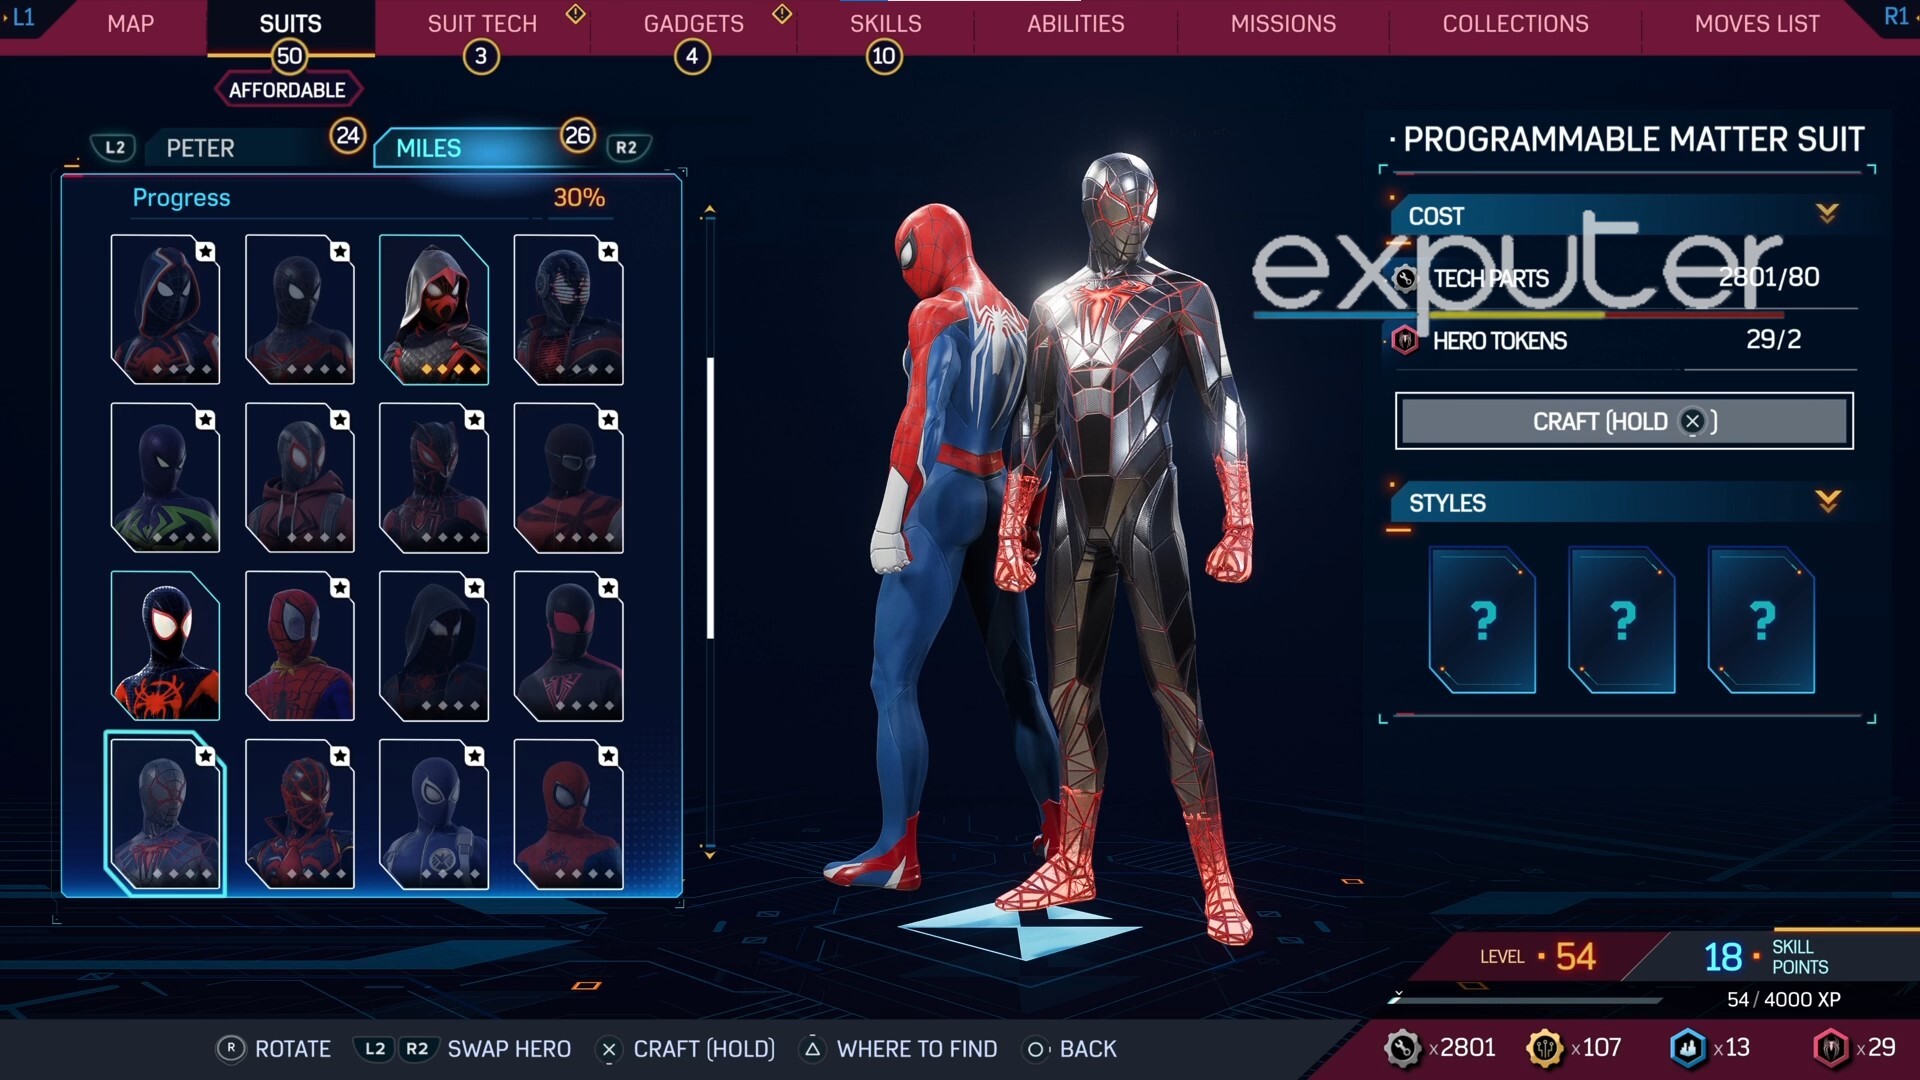 Programmable Matter Suit In Game